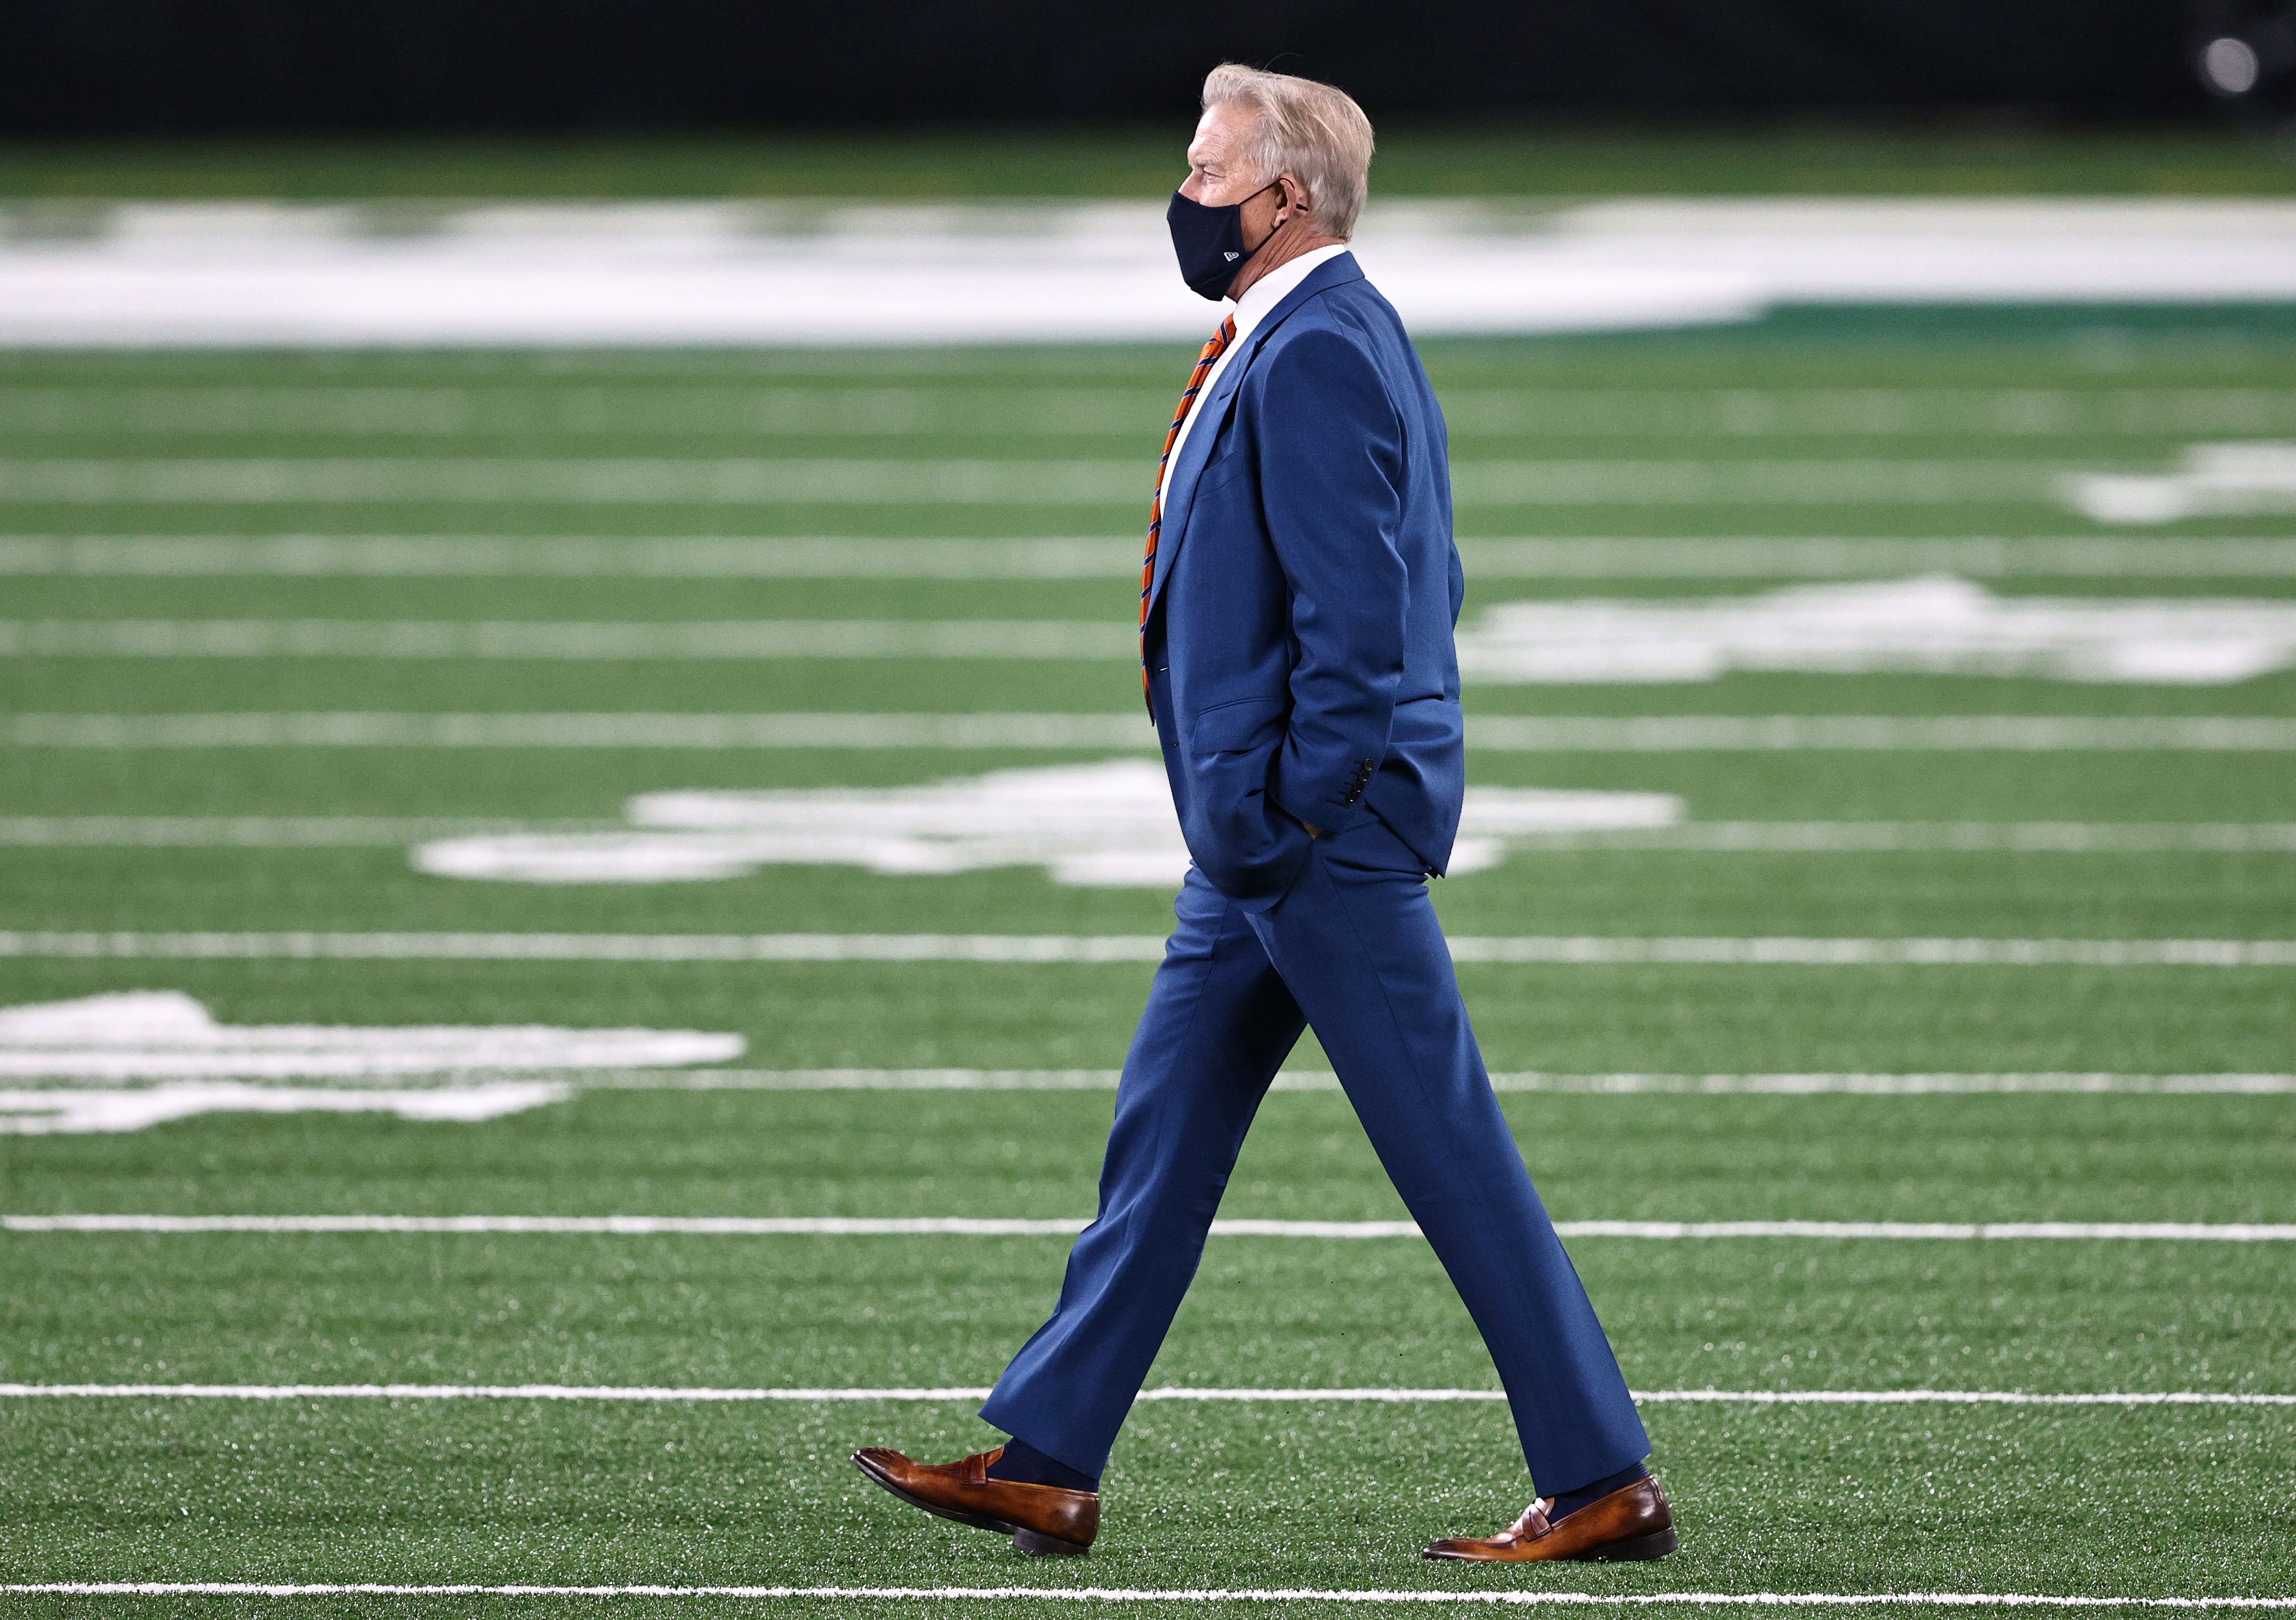 John Elway on the field at an NFL game.